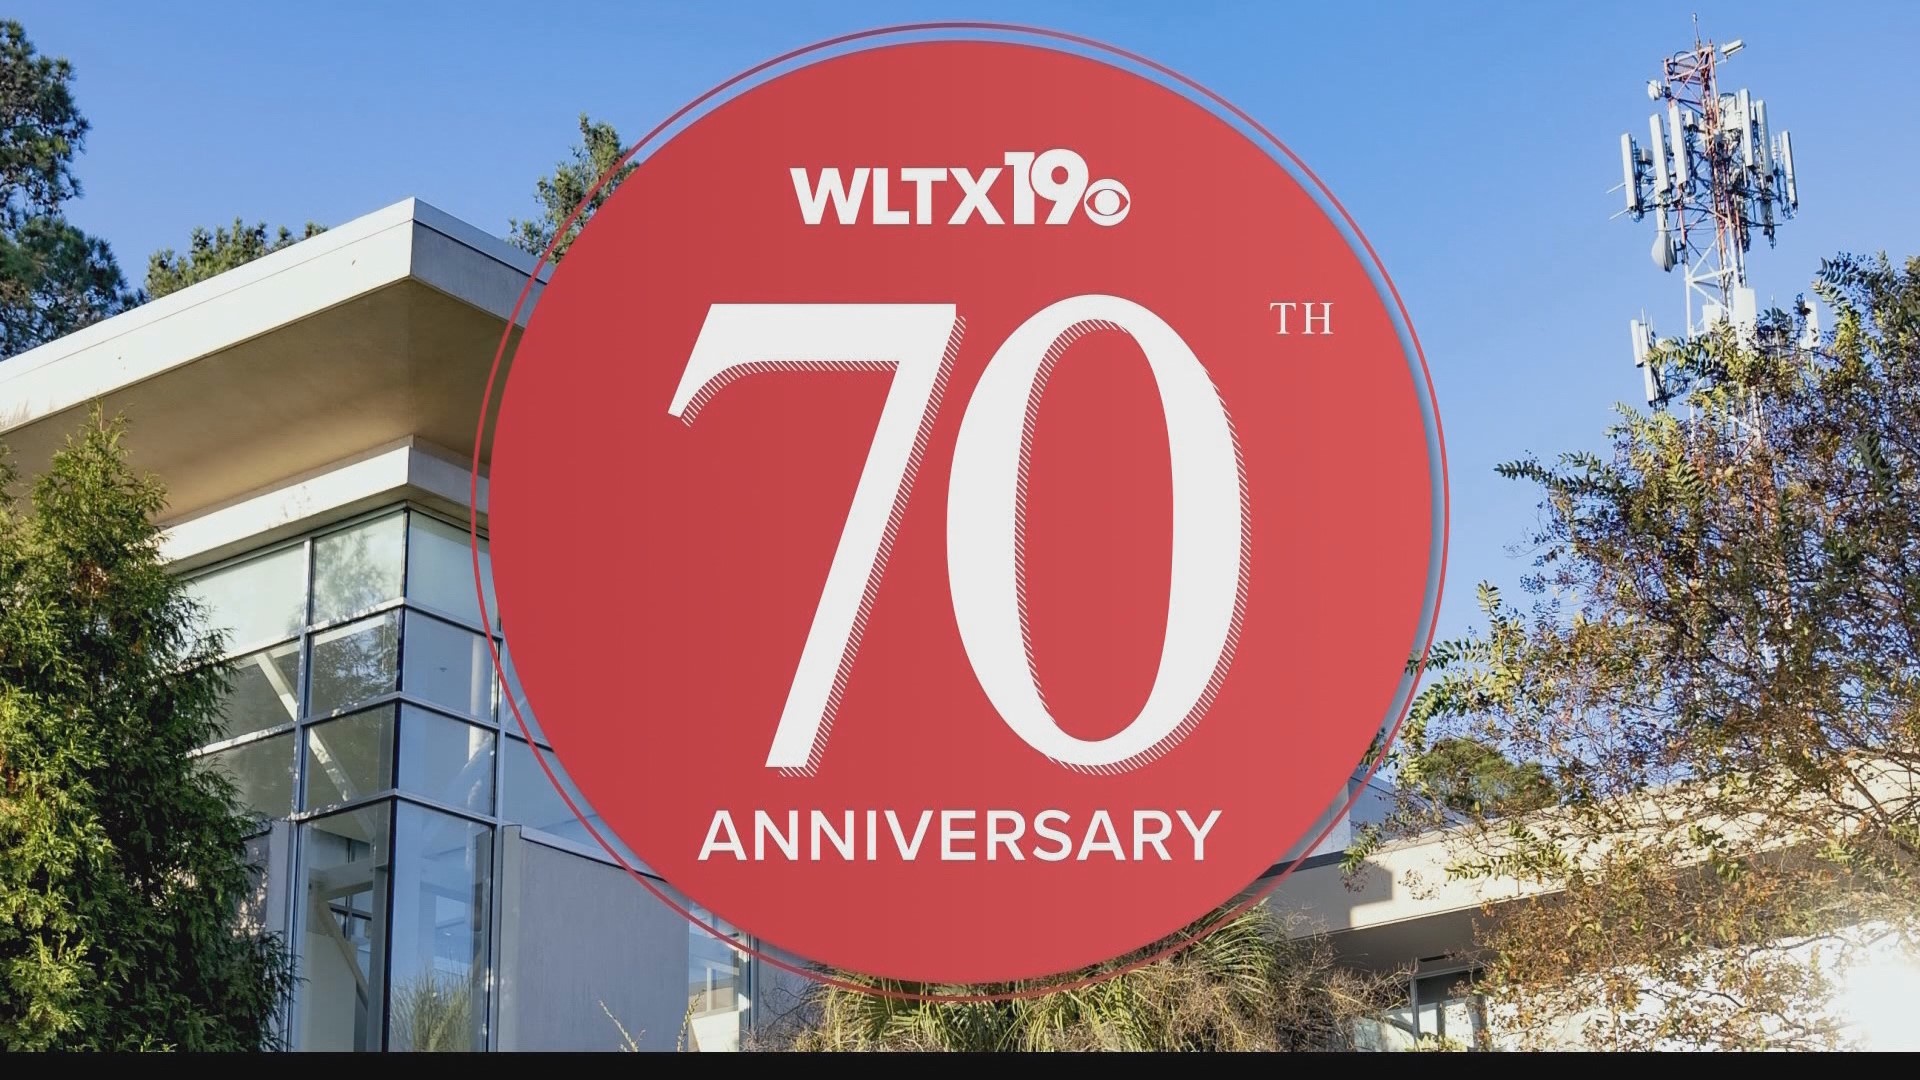 News19's JR Berry and Darci Strickland take a look back at WLTX's 70 years on the air.